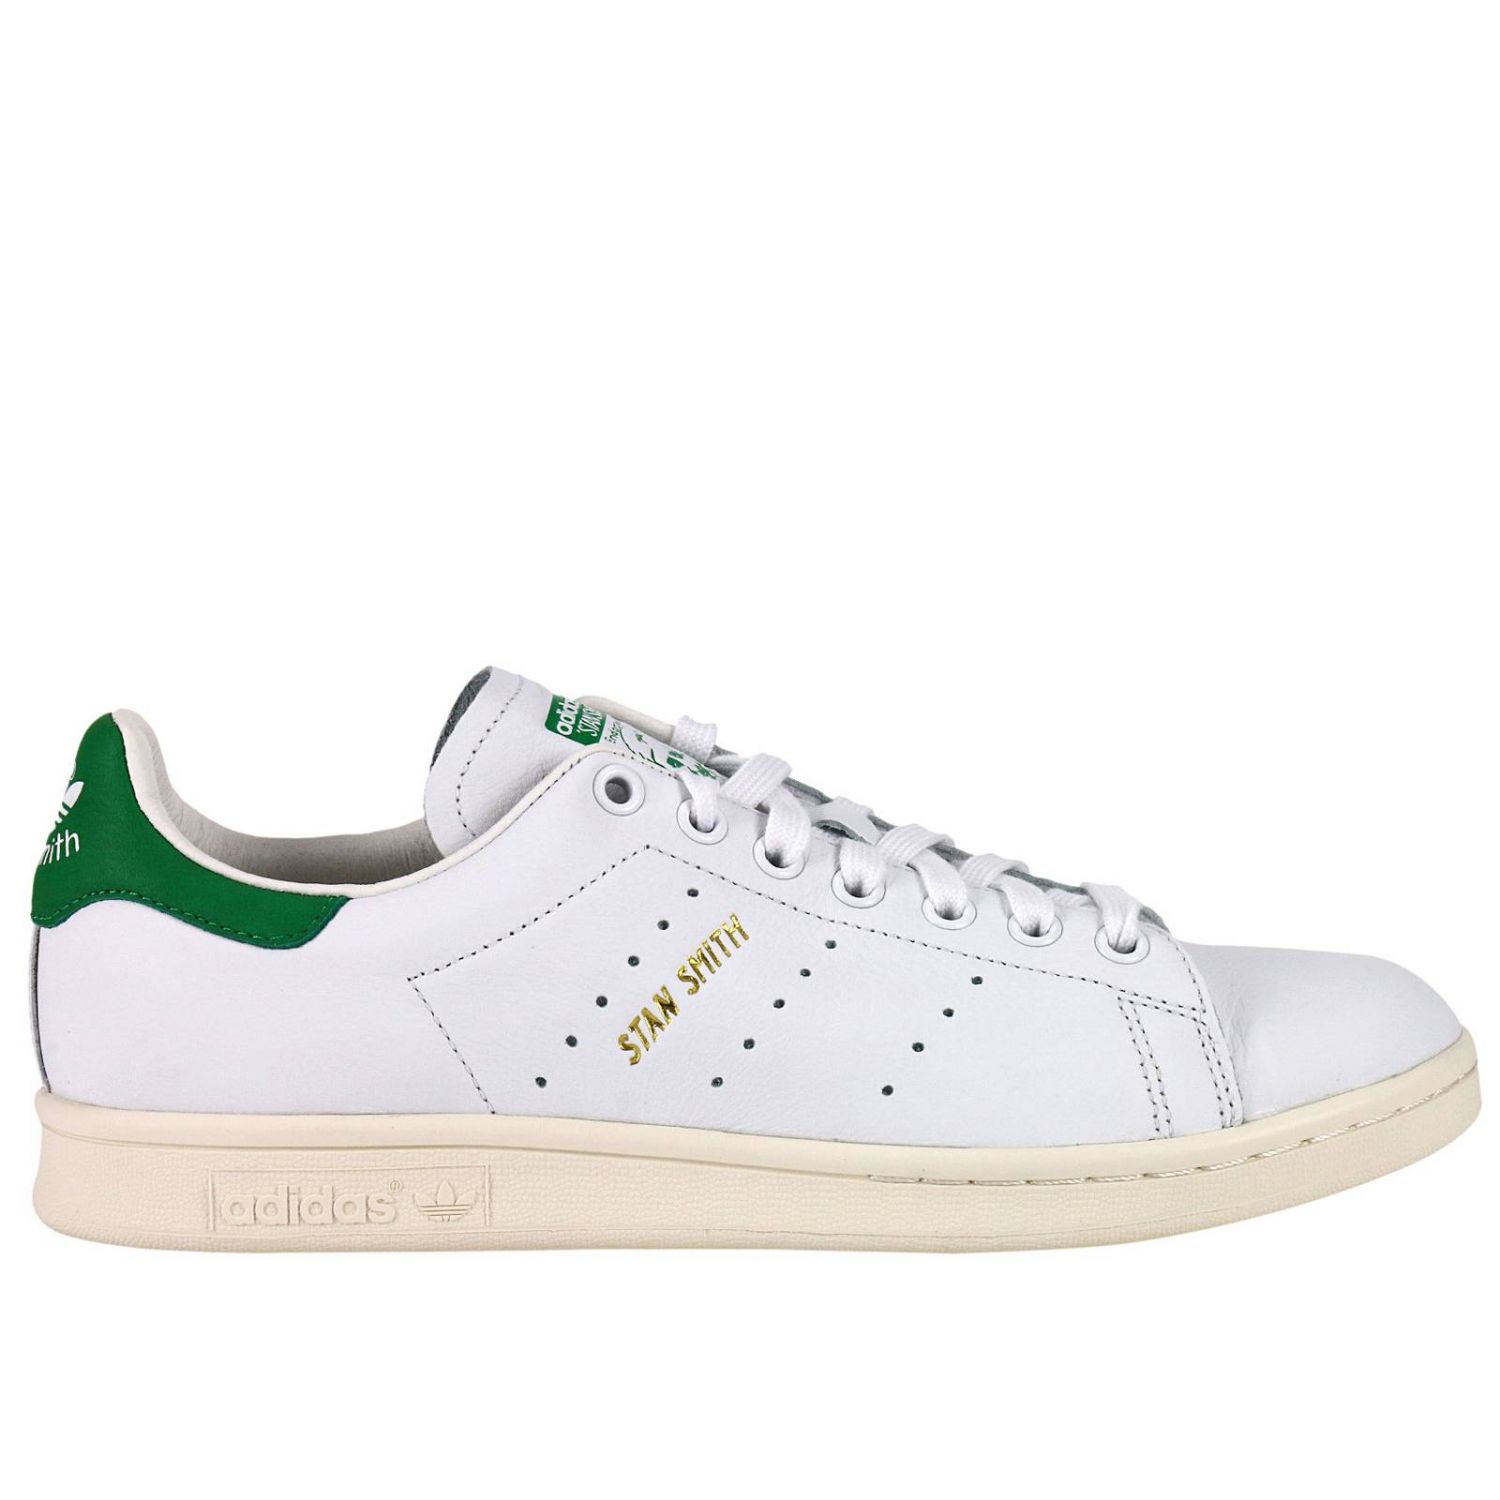 adidas stan smith in pelle